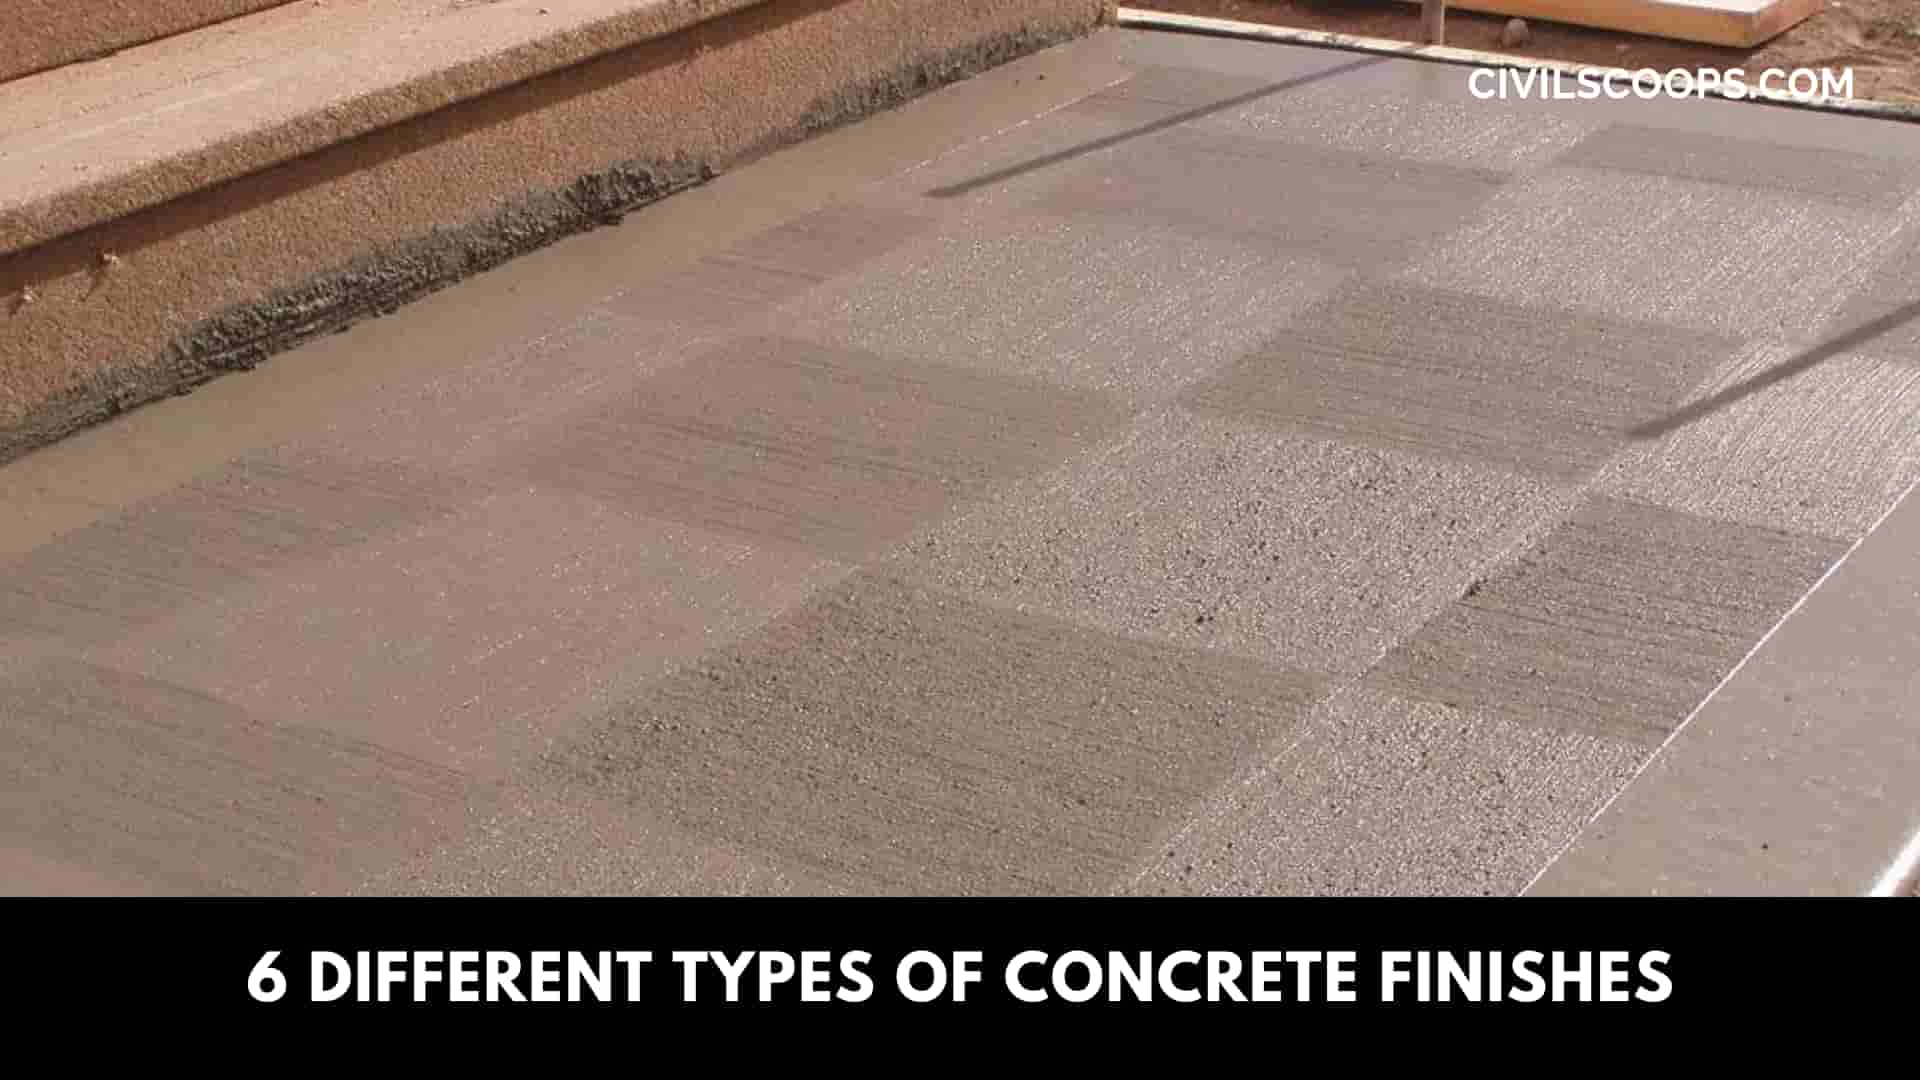 6 Different Types of Concrete Finishes